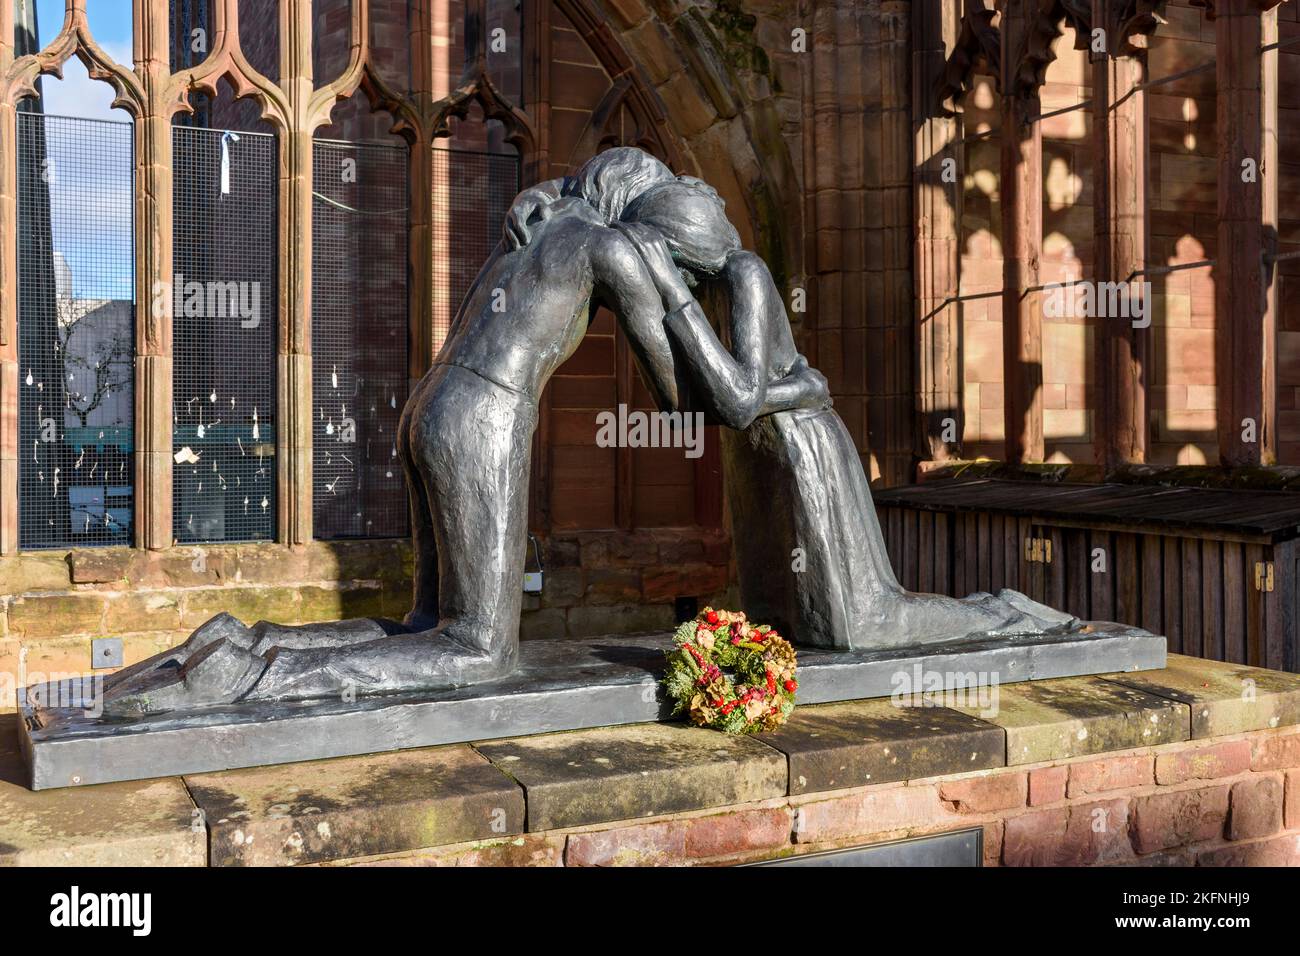 Reconciliation, a sculpture by Josefina de Vasconcellos, in the ruins of the old cathedral, Coventry, West Midlands, England, UK Stock Photo